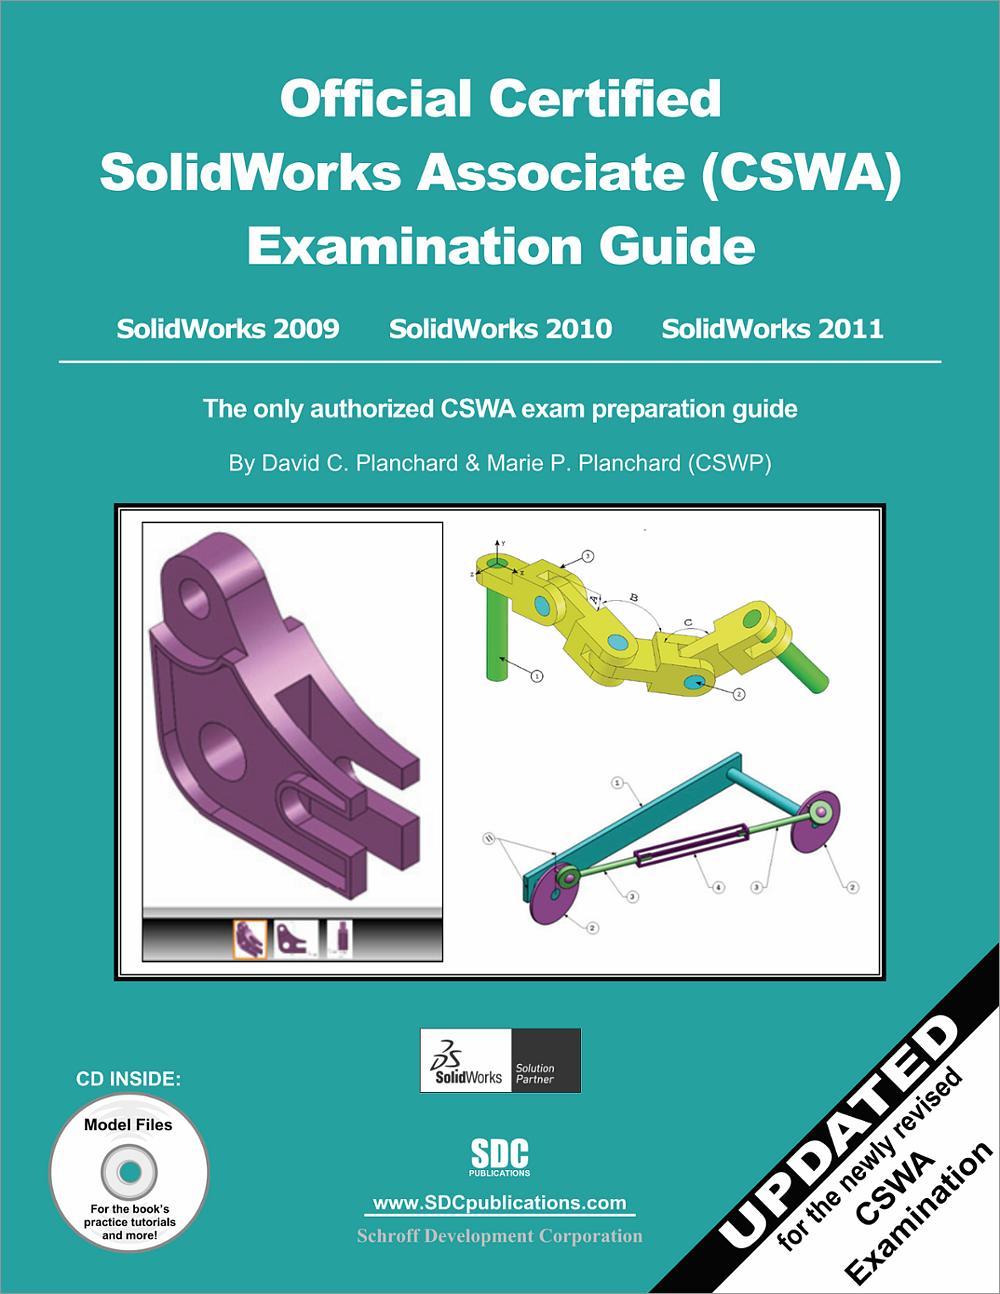 how to find solidworks certificates